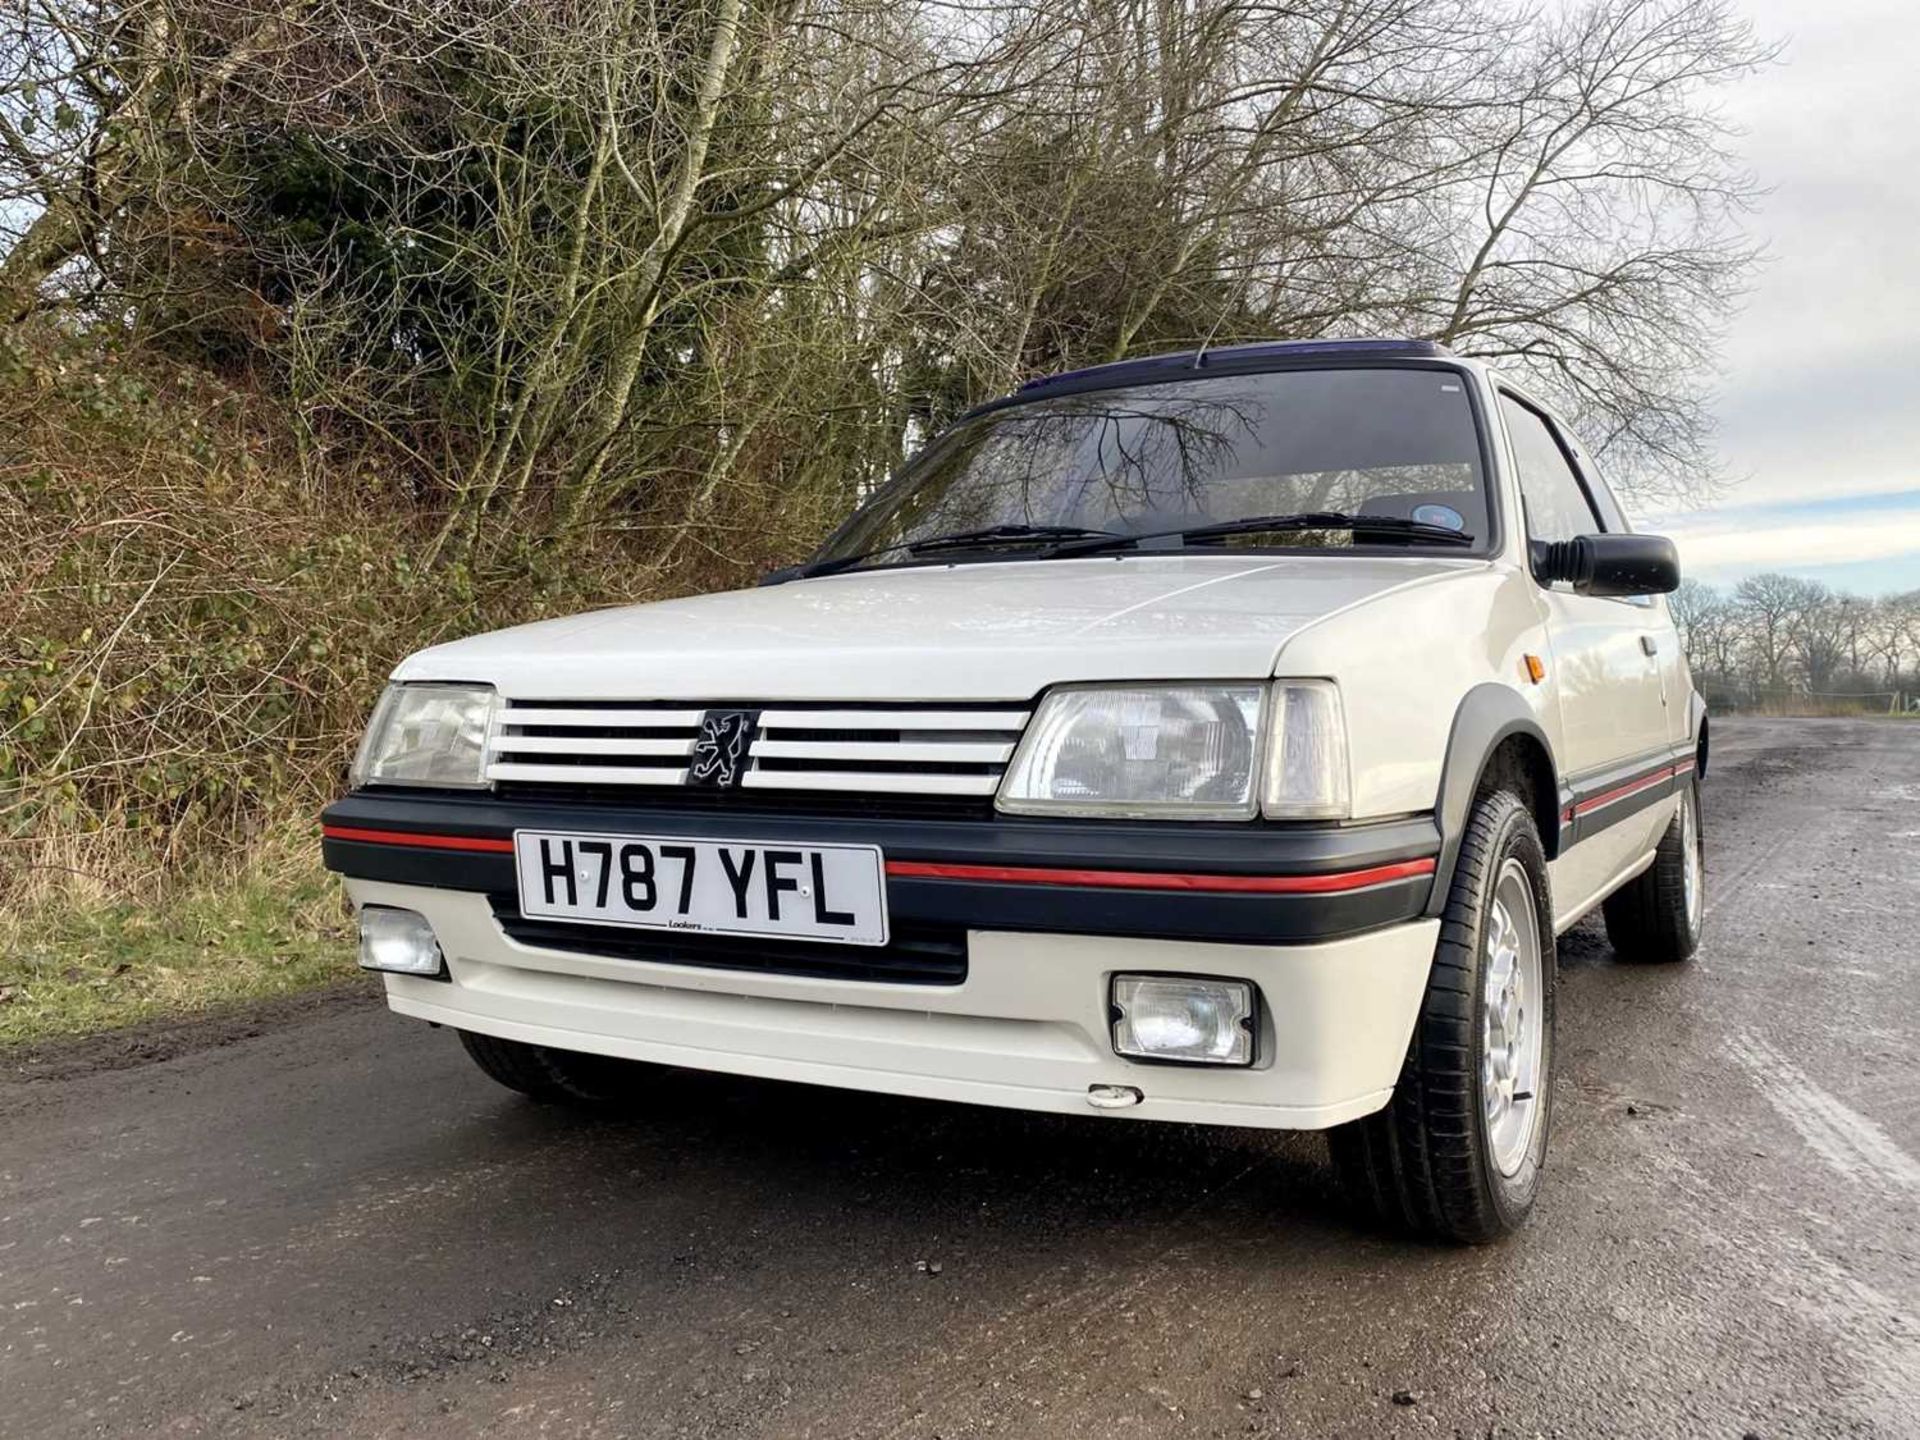 1990 Peugeot 205 GTi 1.6 Only 56,000 miles, same owner for 16 years - Image 6 of 81